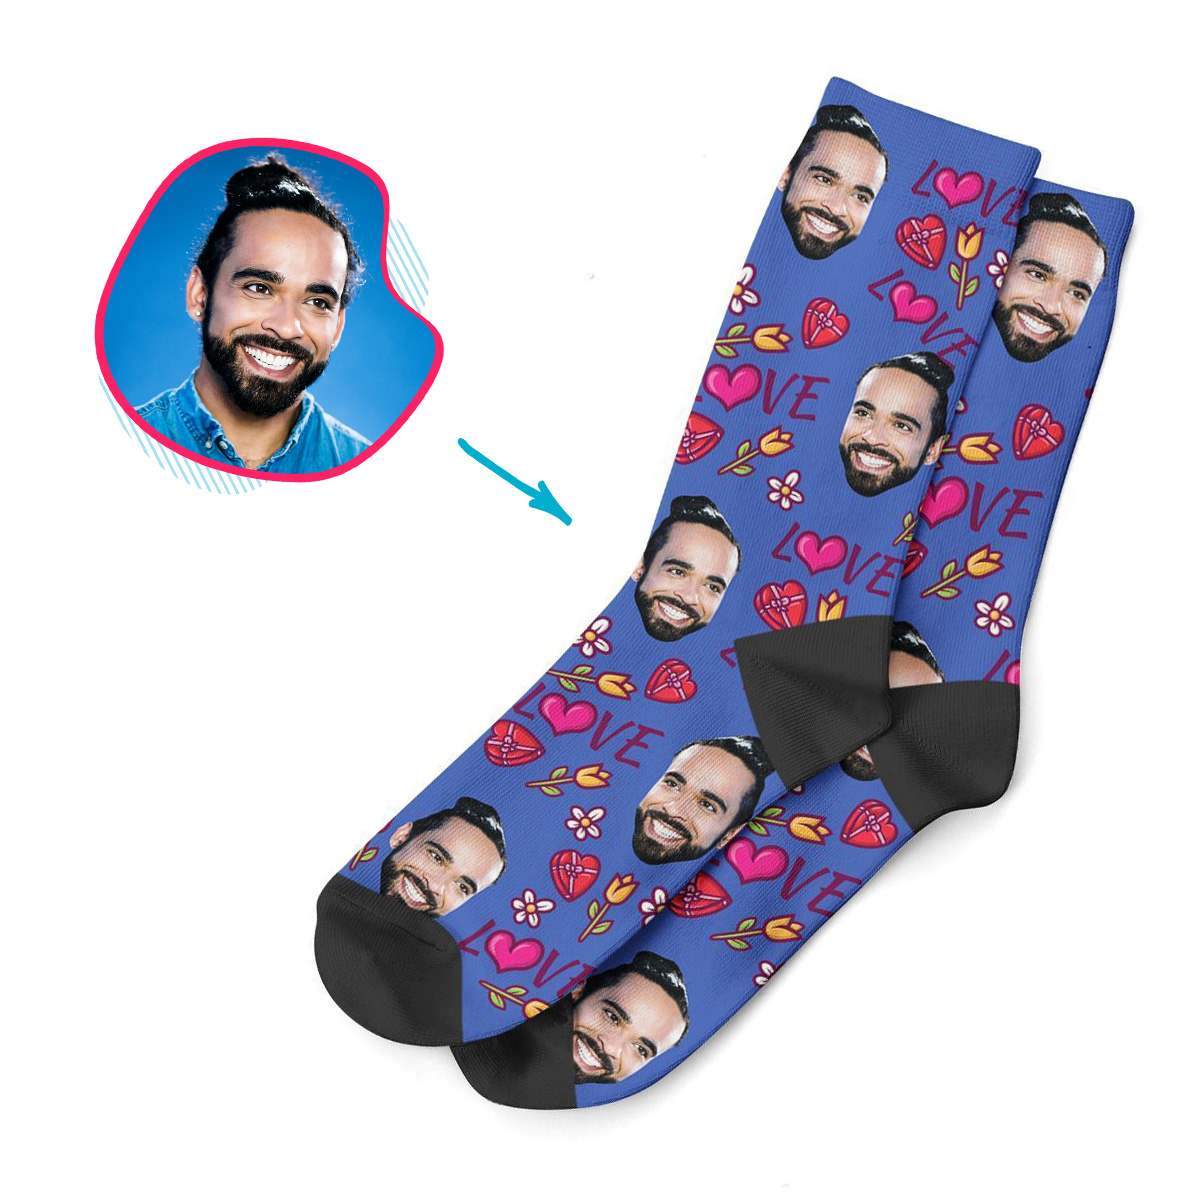 darkblue Hearts and Flowers socks personalized with photo of face printed on them